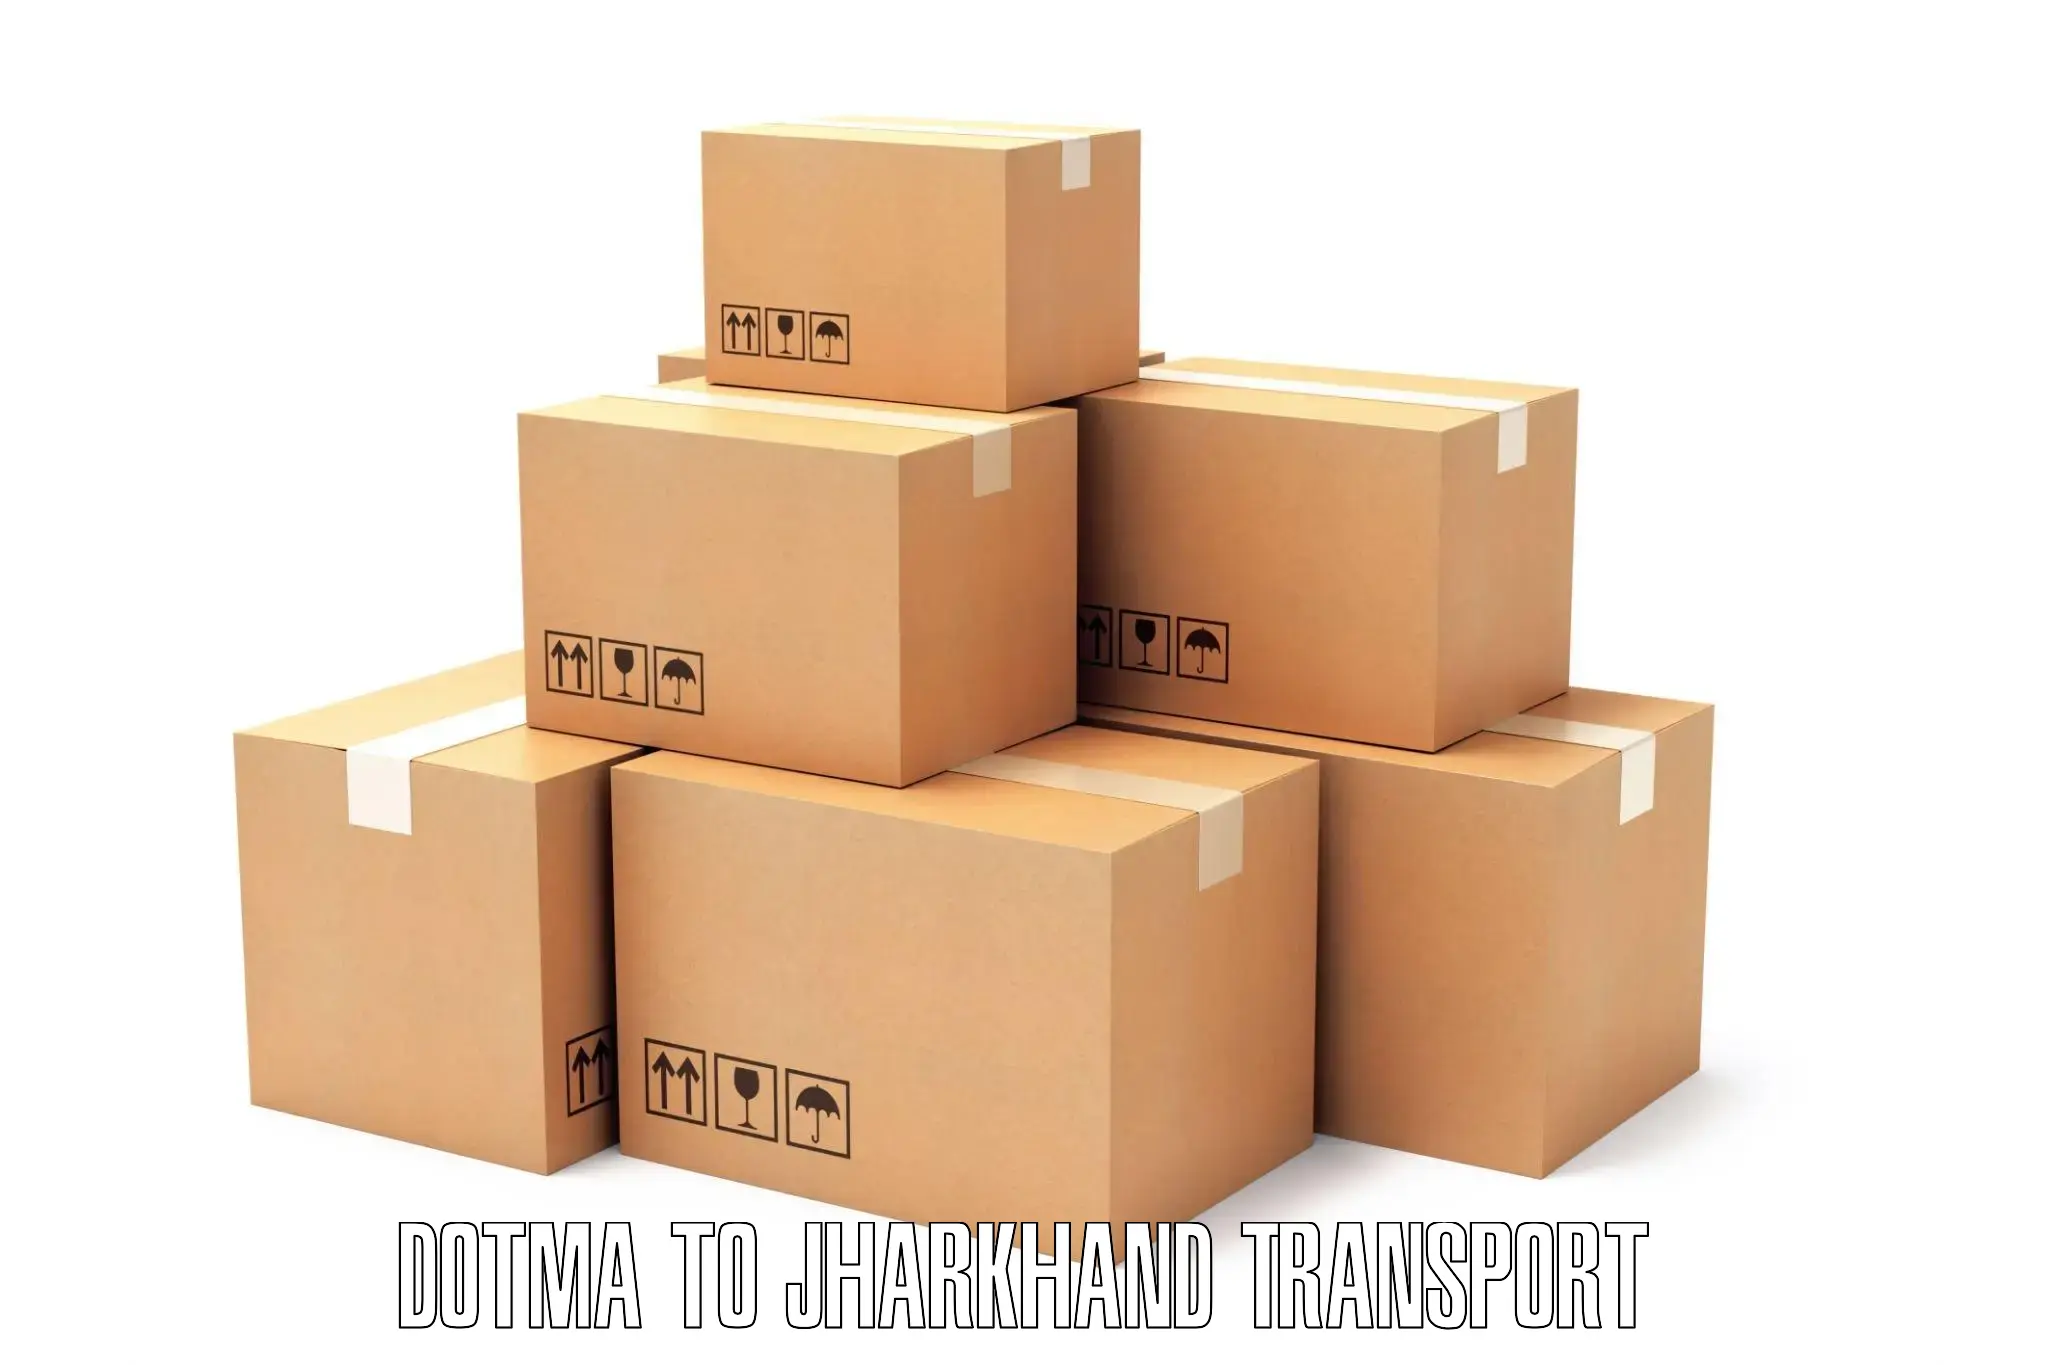 Cargo transport services Dotma to Jharkhand